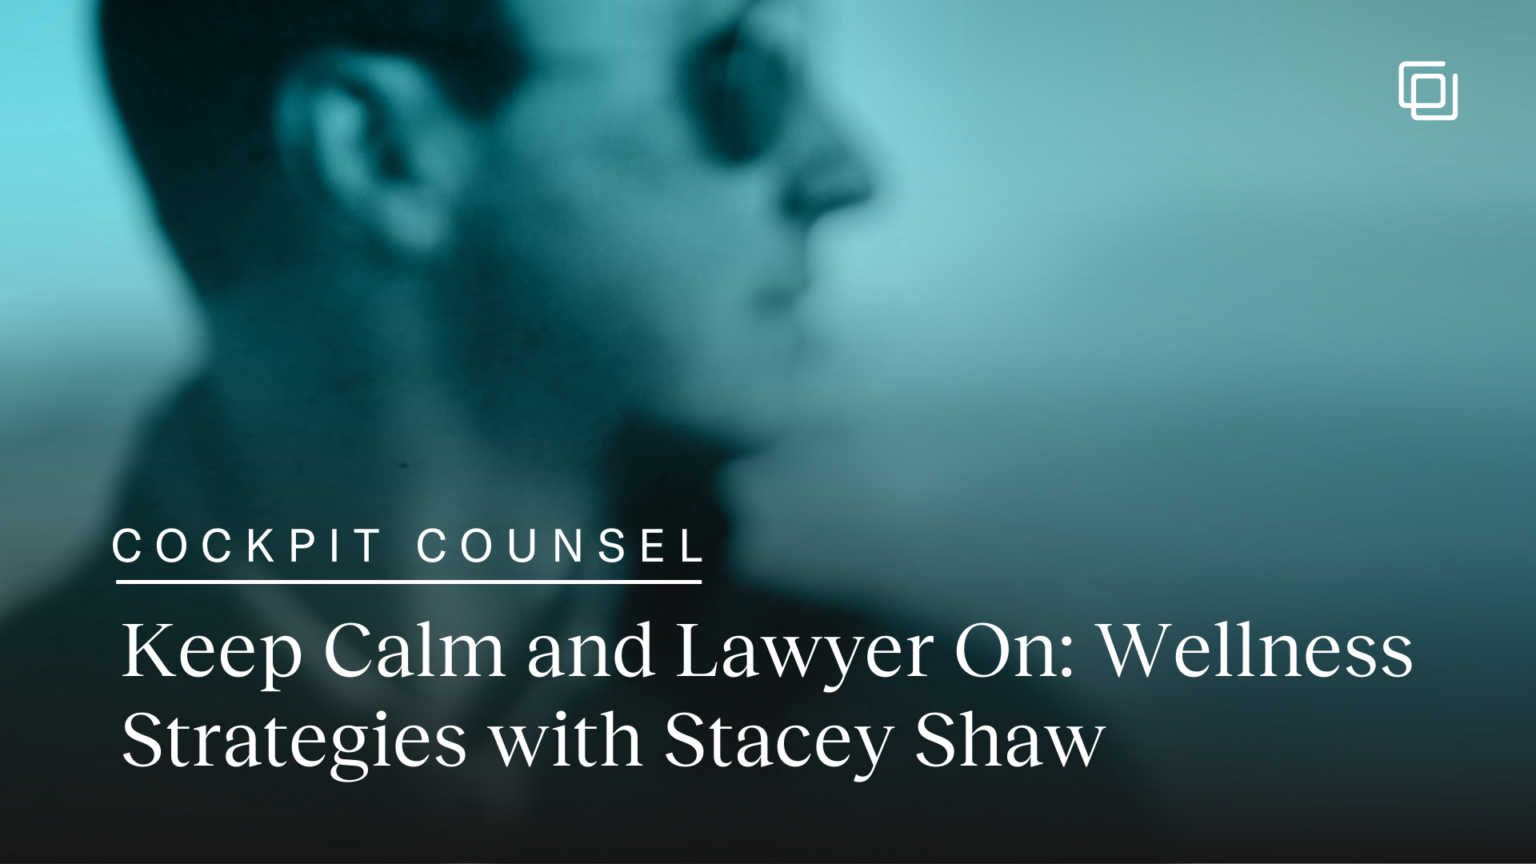 Cockpit Counsel: Keep Calm and Lawyer On: Wellness Strategies for Legal Pros